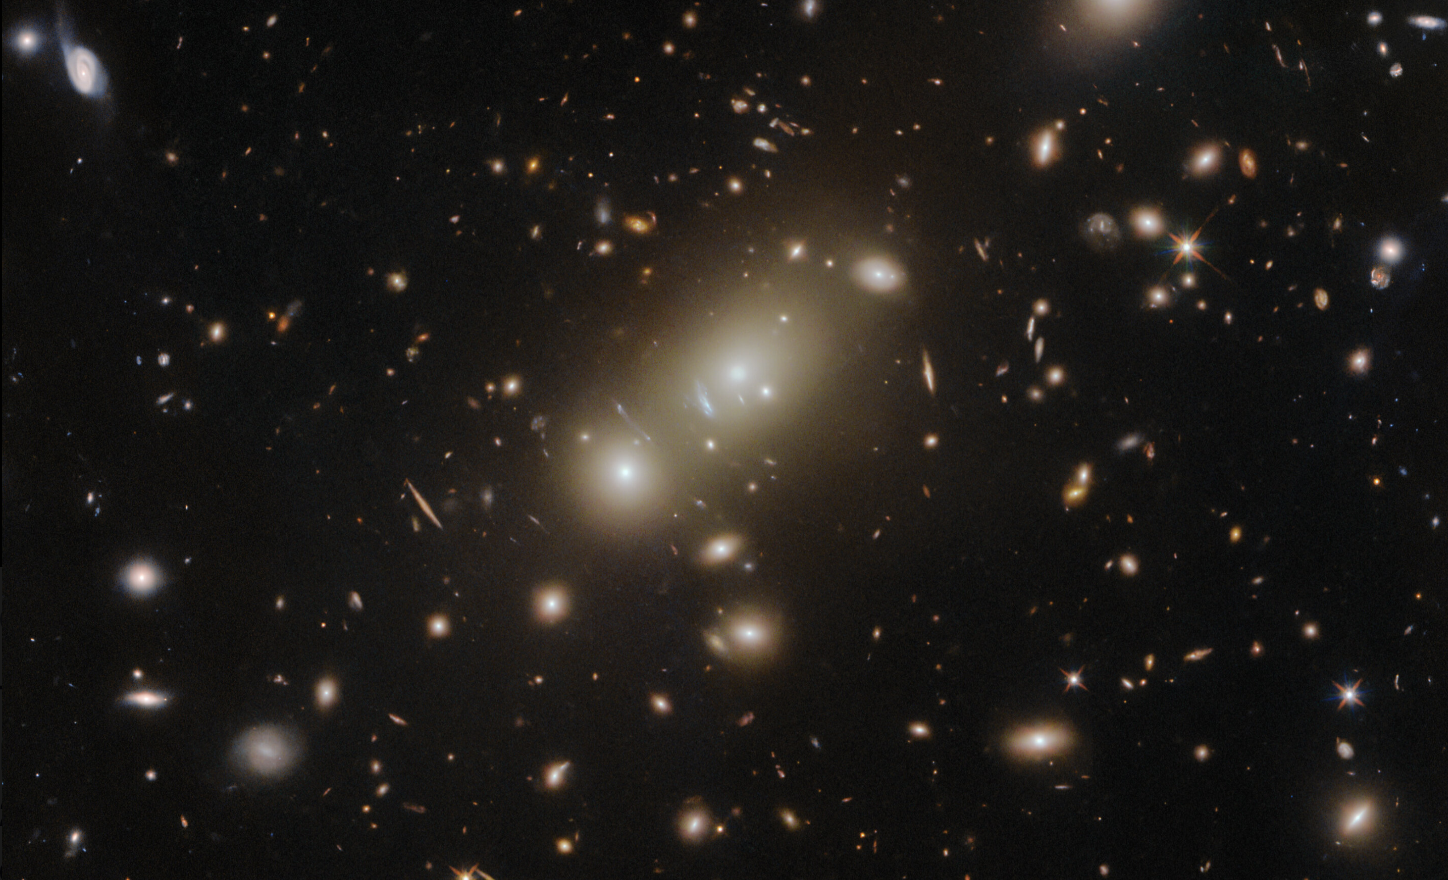 Cropped photo of Abell 3322. Credit: ESA/Hubble & NASA, H. Ebeling.